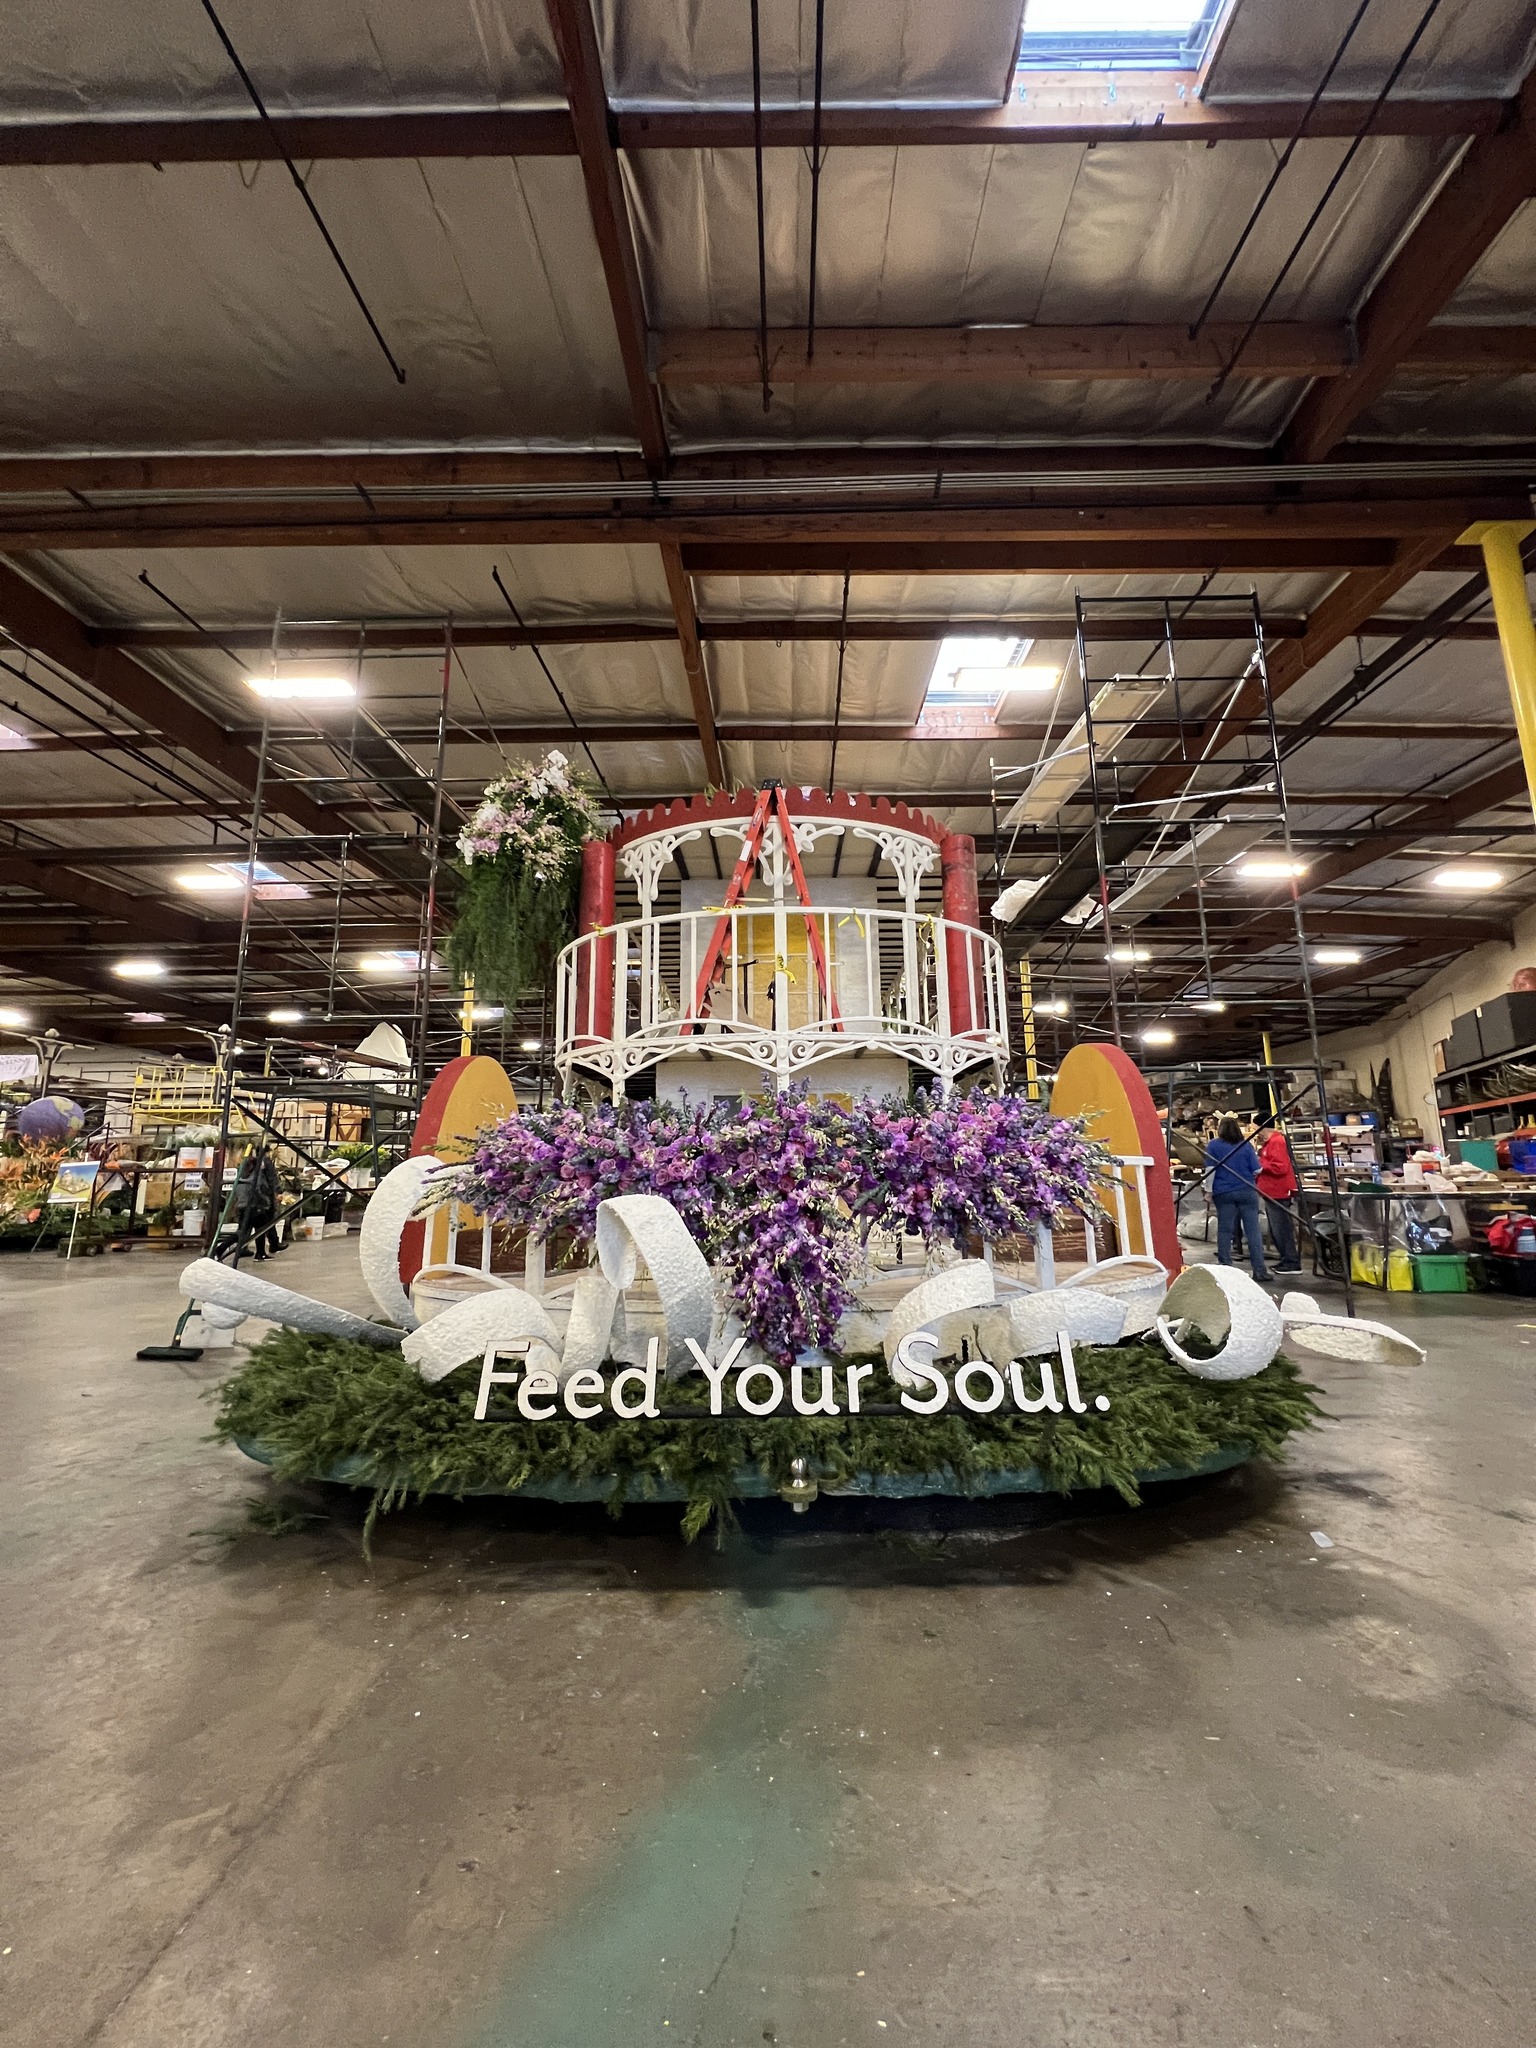 Catch the Louisiana ‘Feed Your Soul’ float in the 2023 Rose Parade